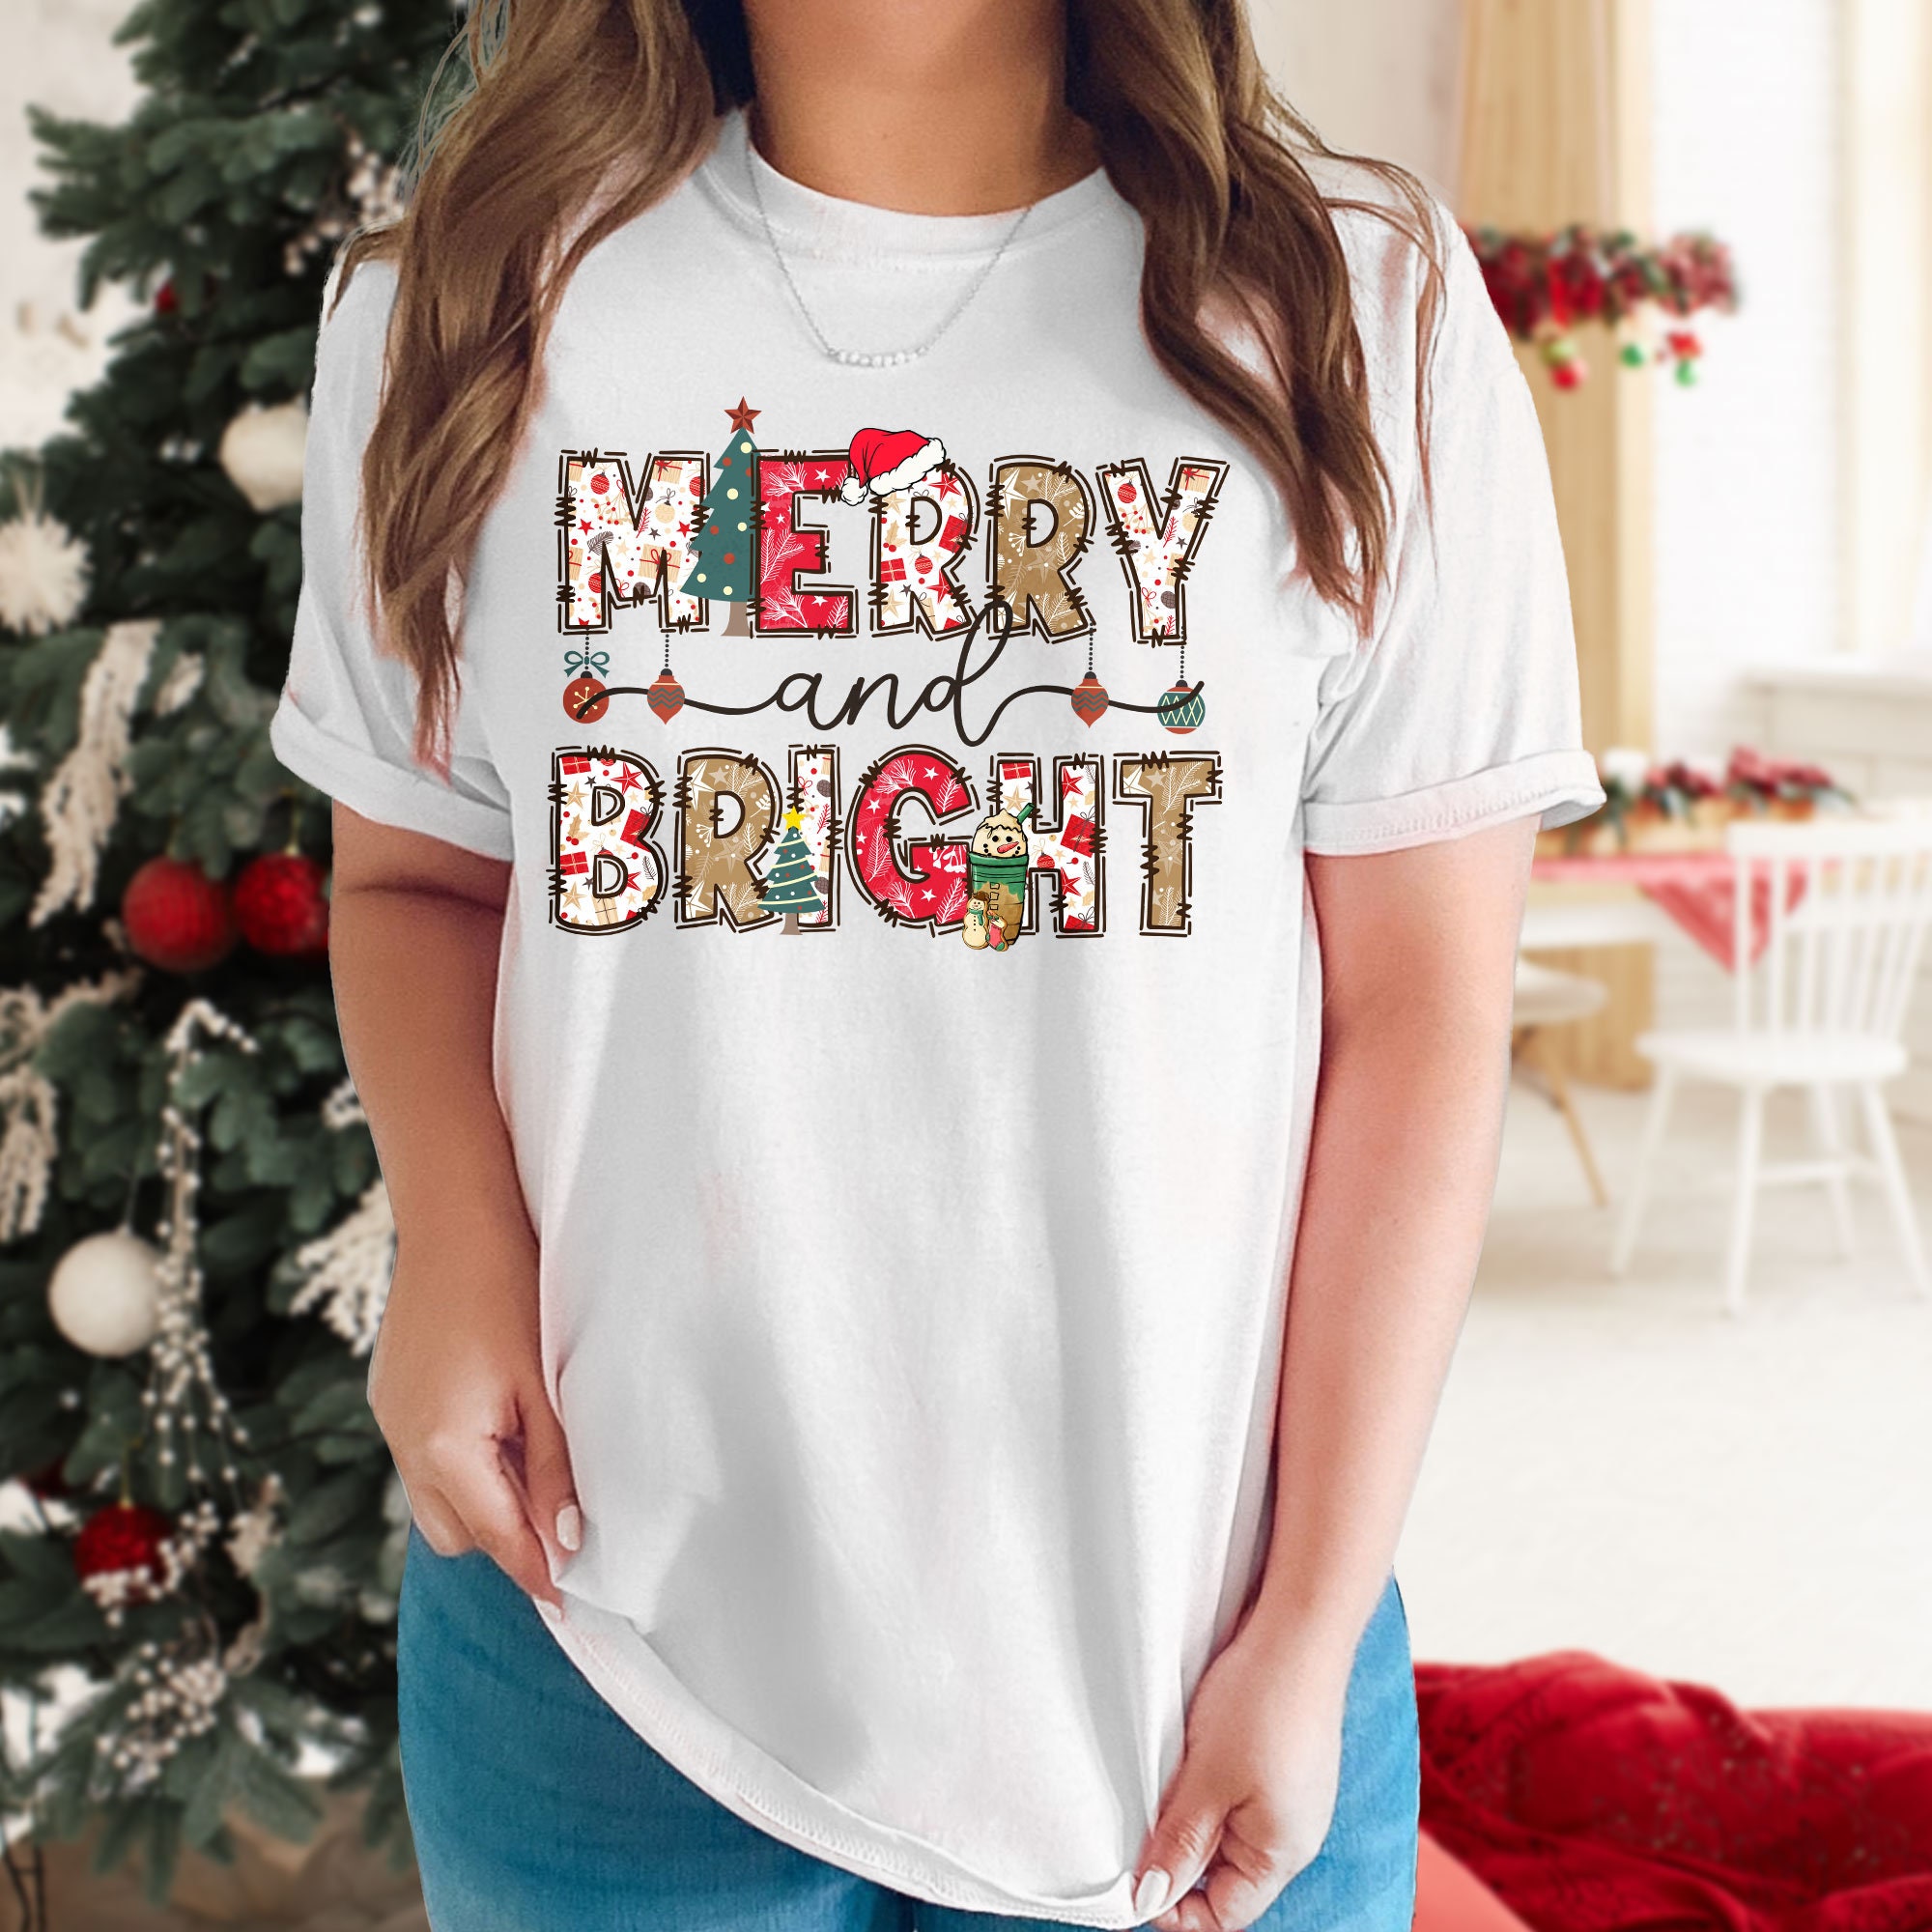 Discover Merry And Bright T-Shirt, Cute Christmas Light T-shirt, Friends And Family Holiday T-shirt